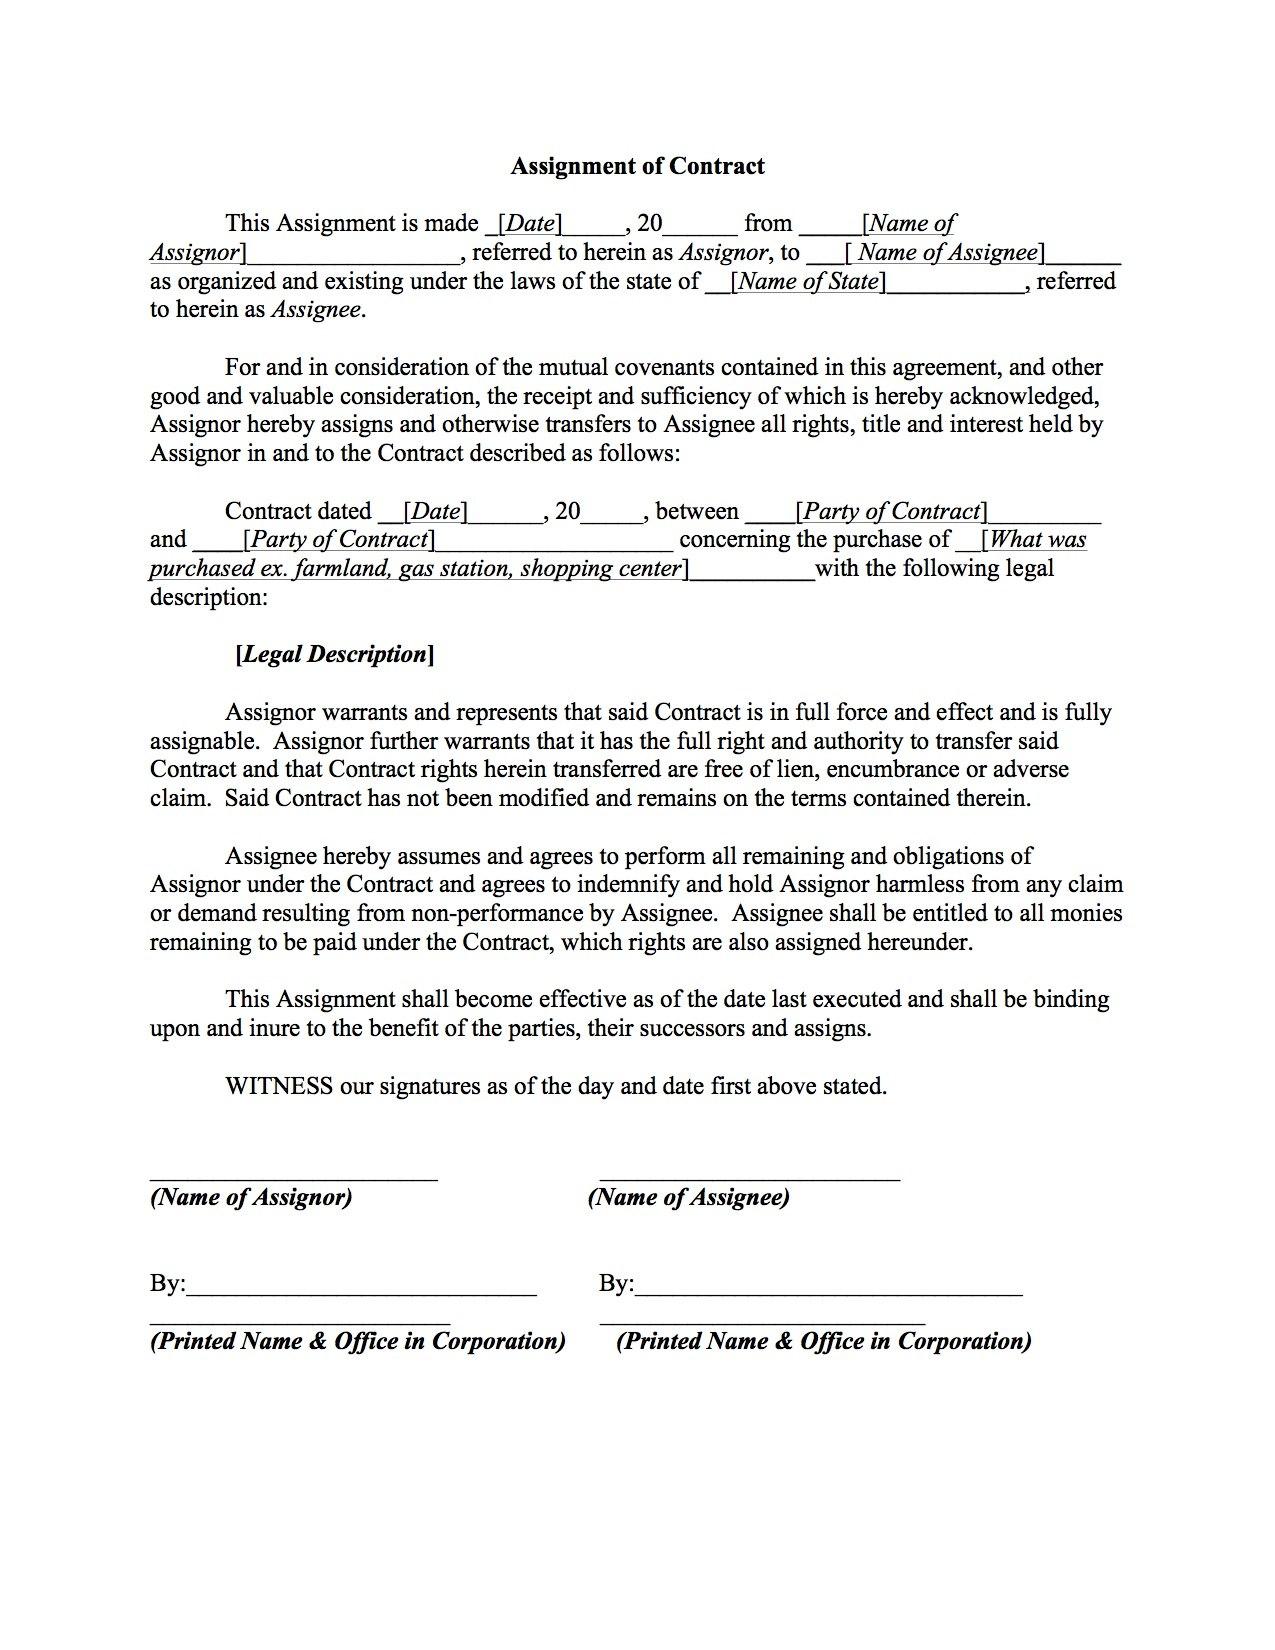 Assignment Of Contract Template – Boardwalk Legal Aids intended for Claim Assignment Agreement Template